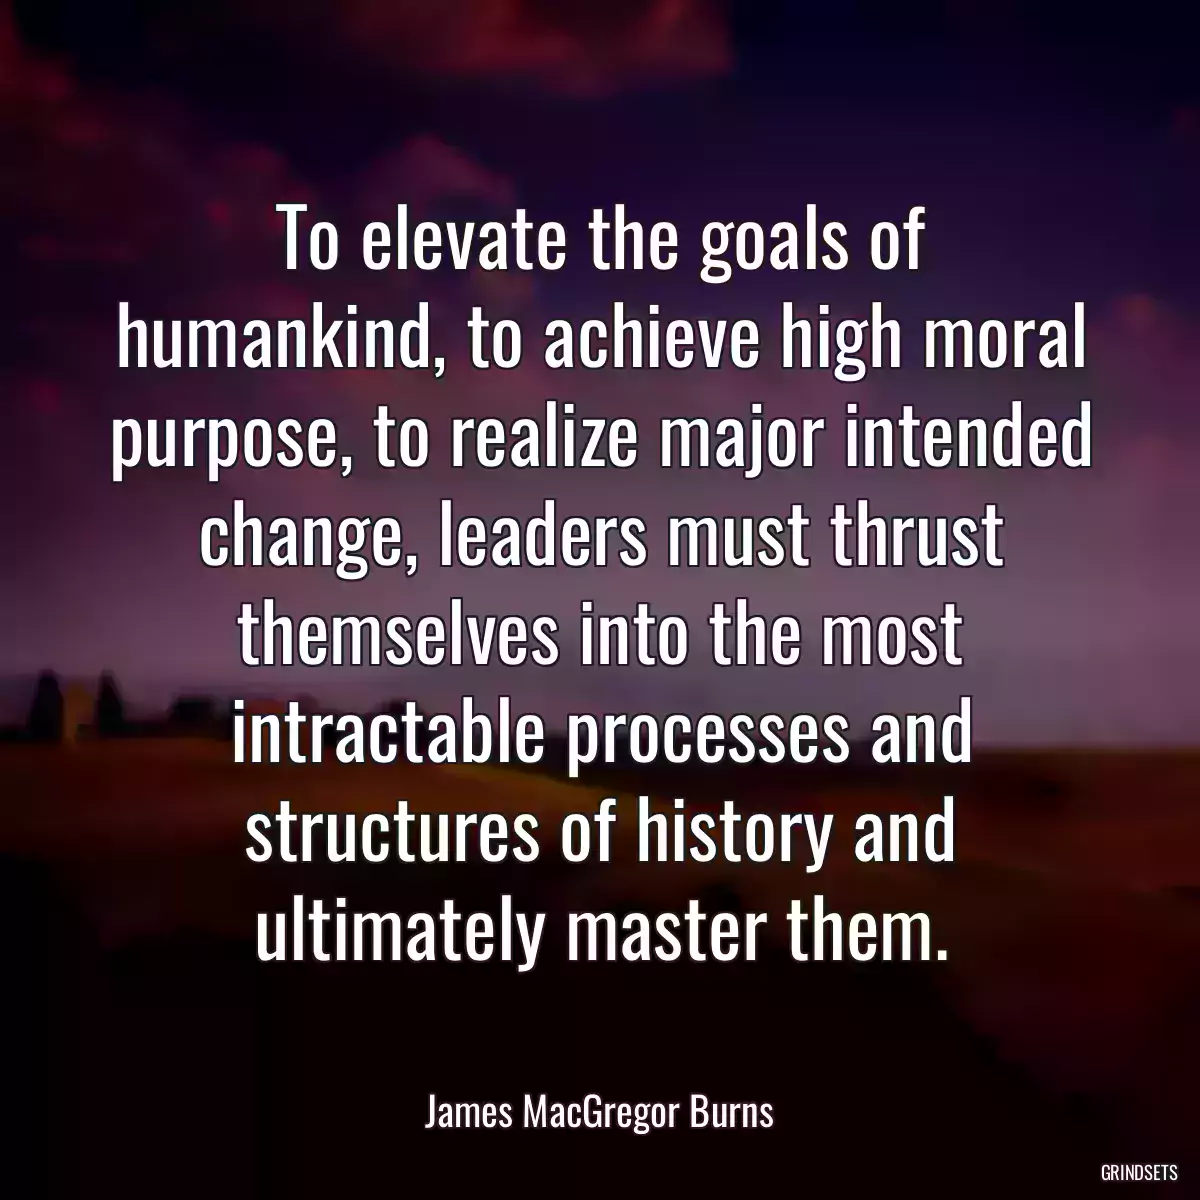 To elevate the goals of humankind, to achieve high moral purpose, to realize major intended change, leaders must thrust themselves into the most intractable processes and structures of history and ultimately master them.